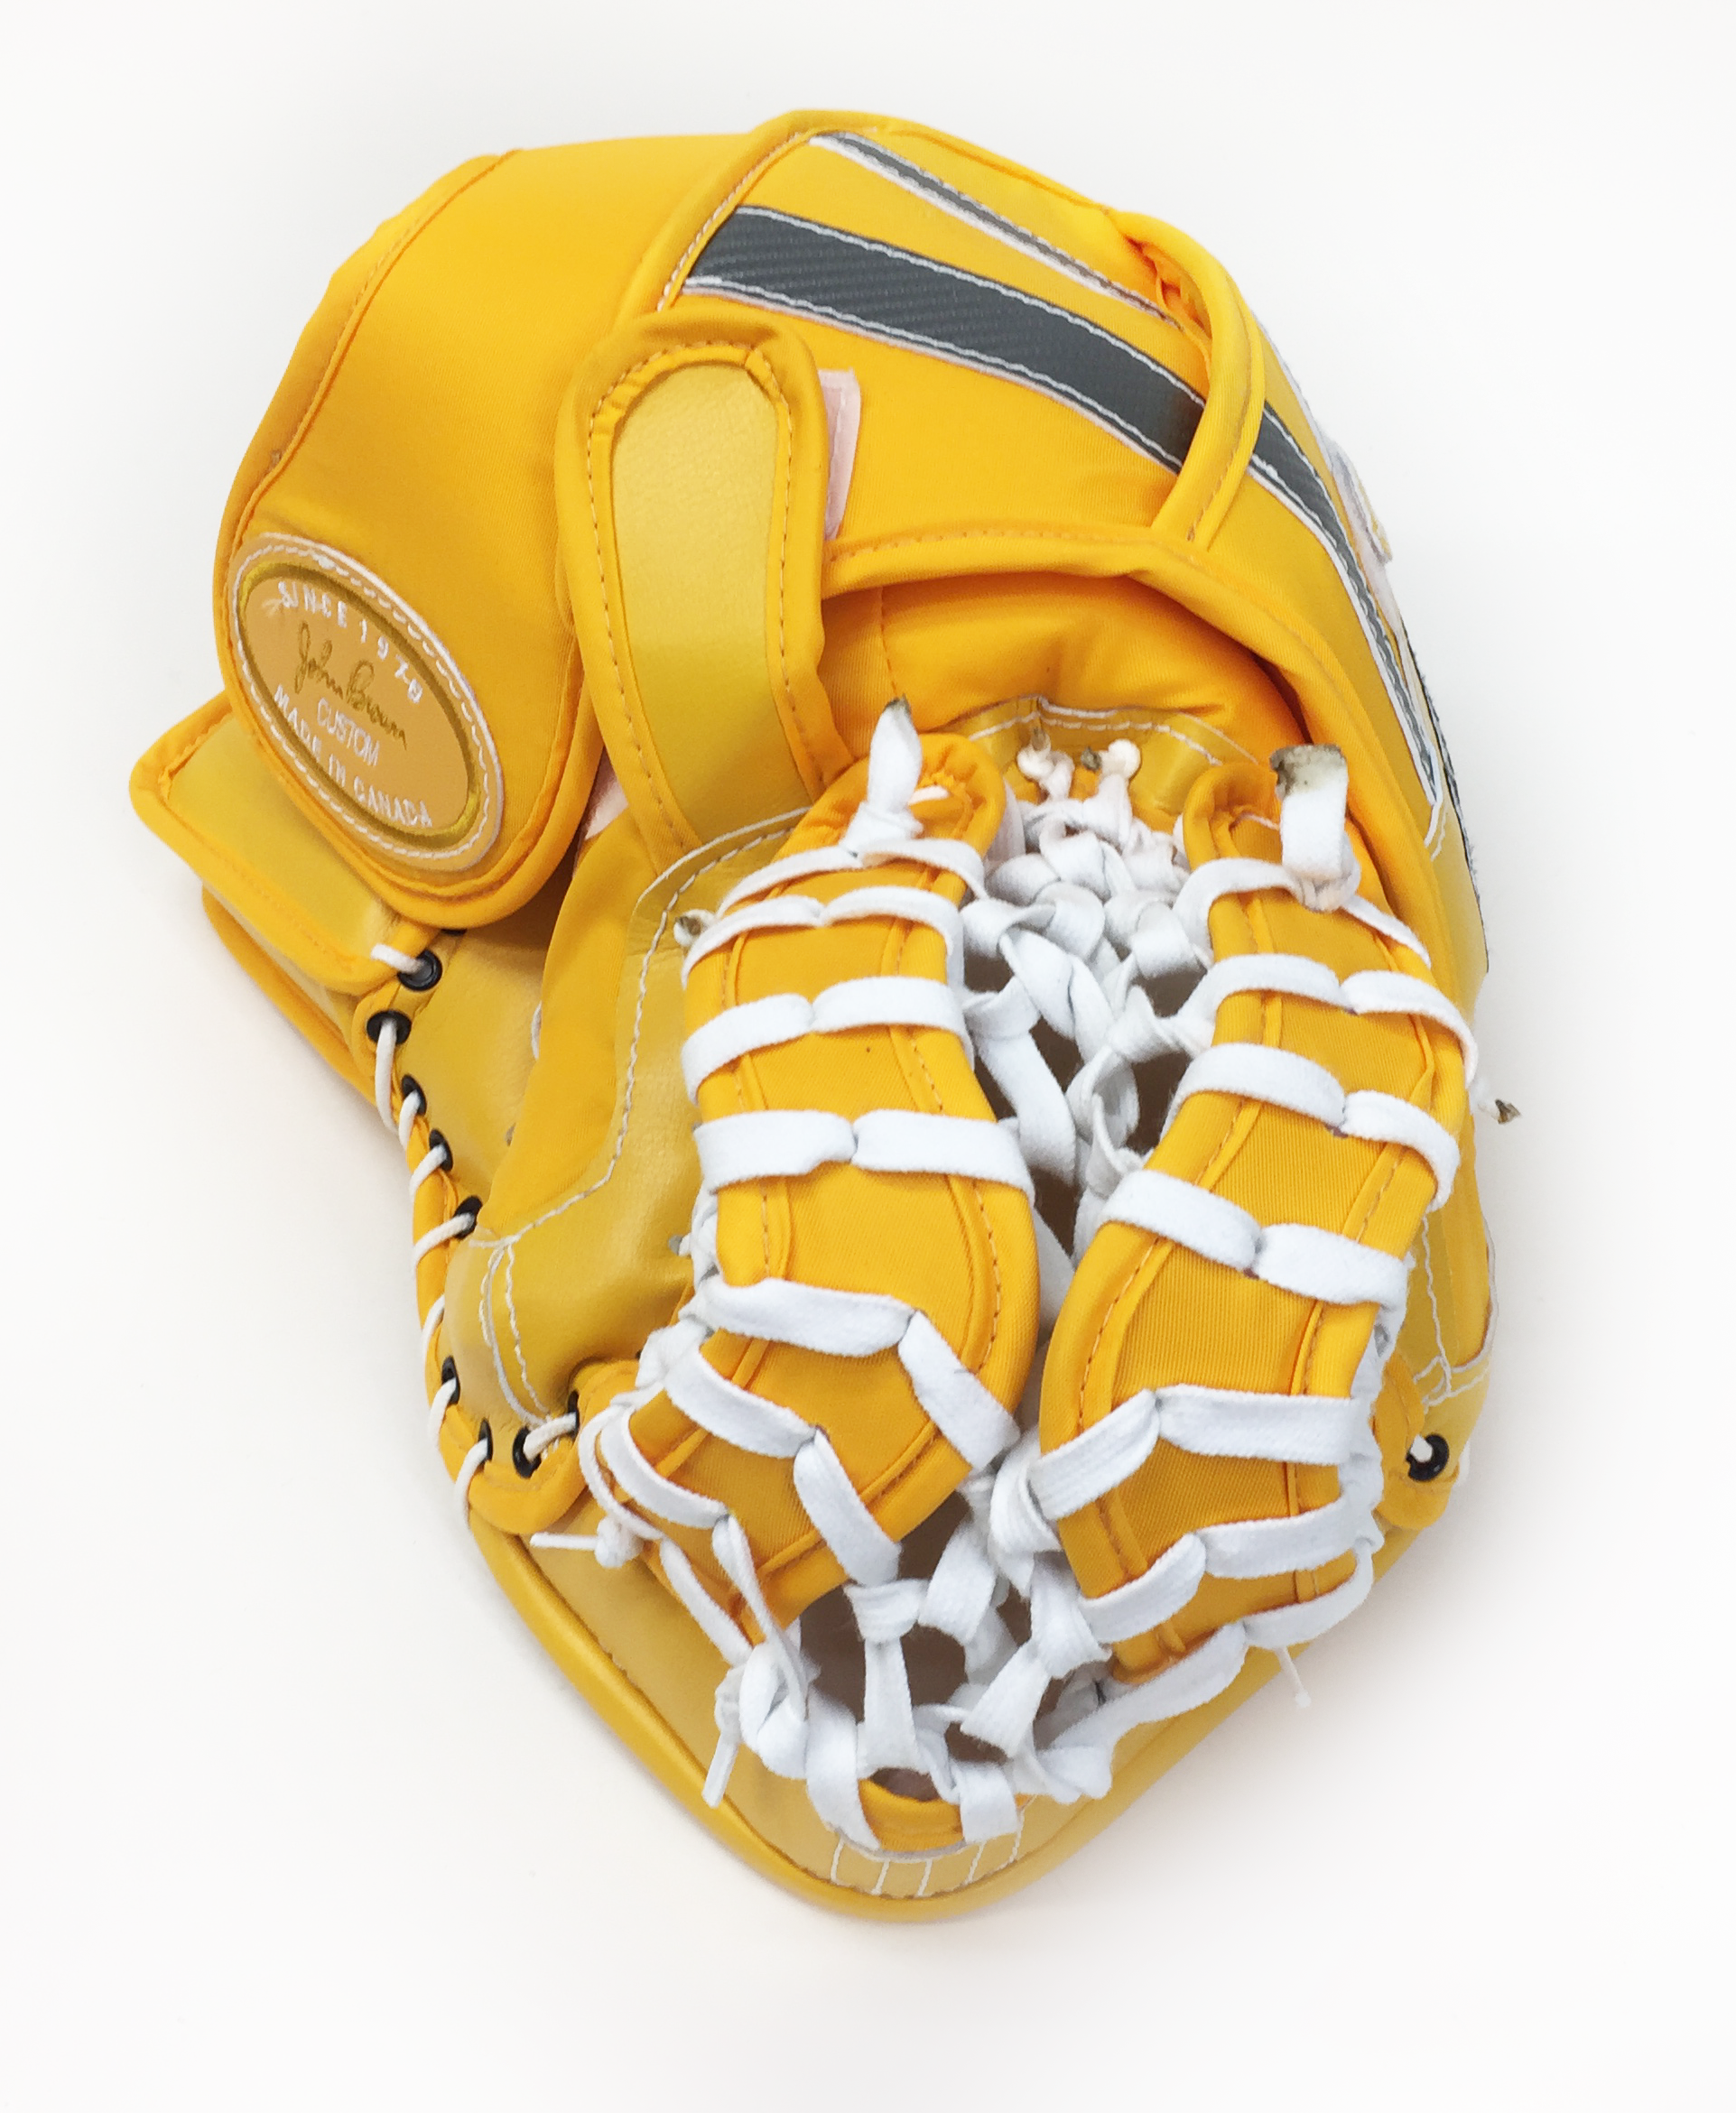 Rear pocket of 2500 catch glove in sport gold and stainless steel silver